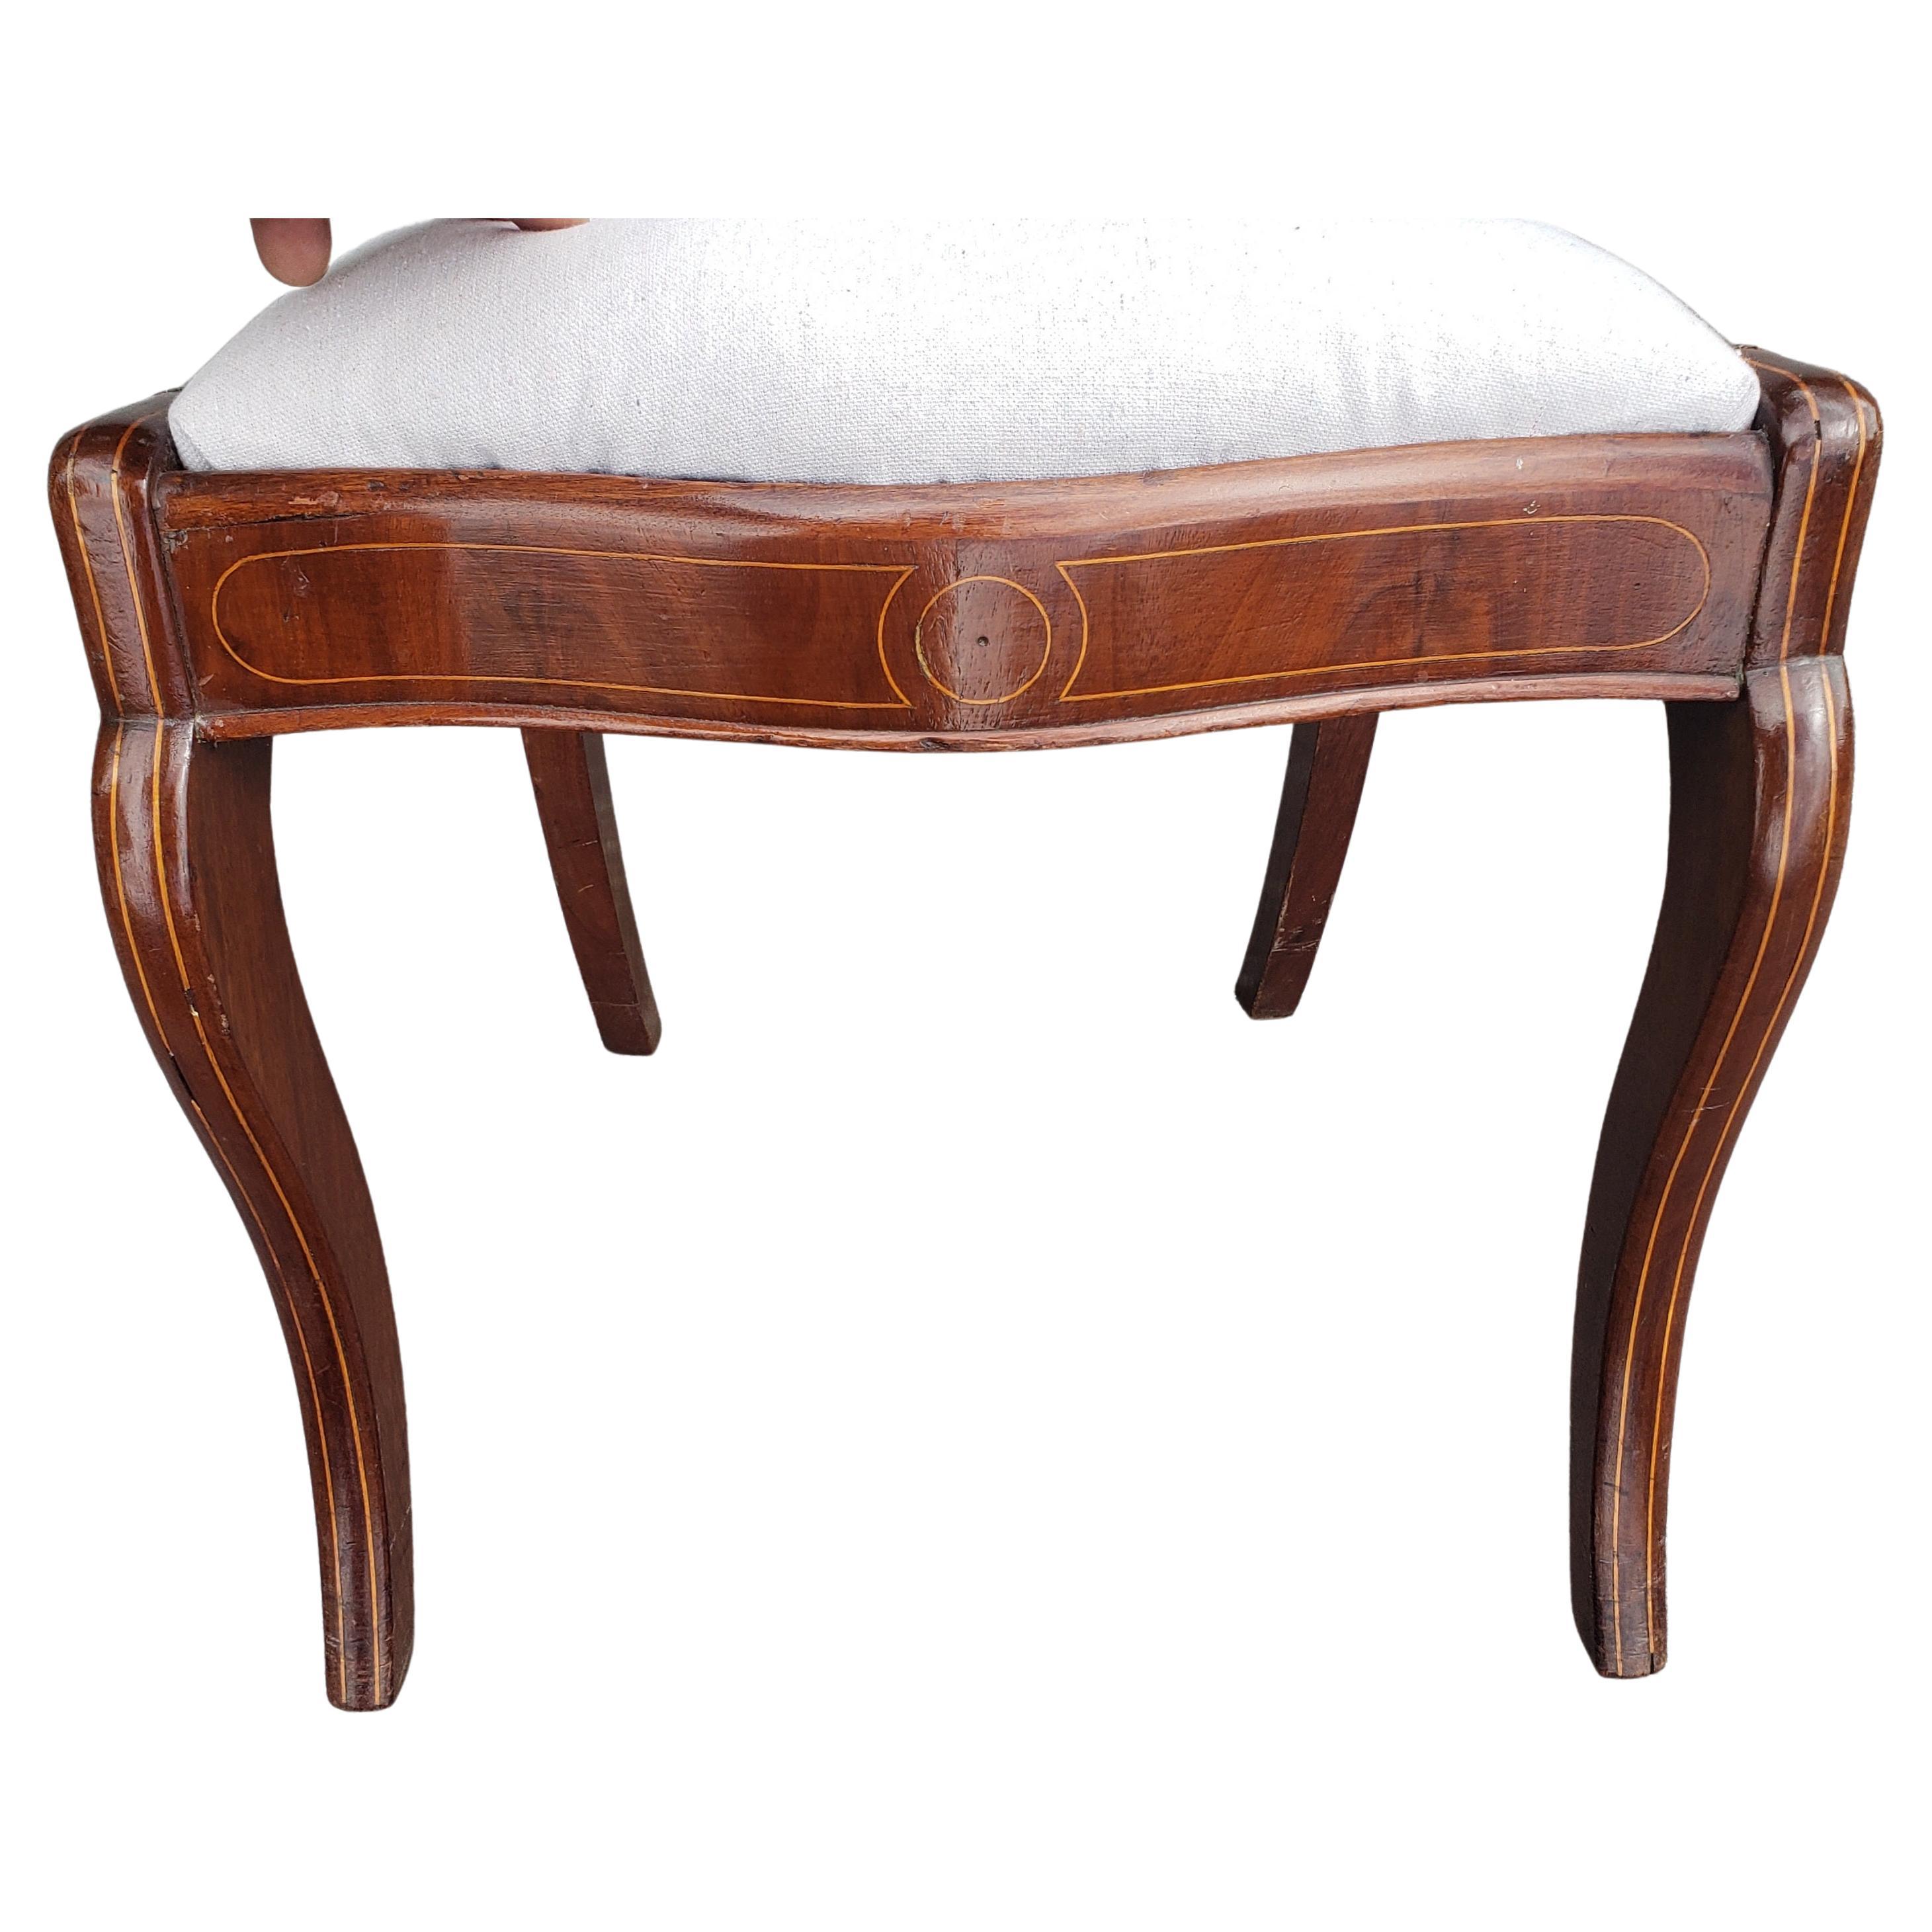 American 19th C. Flame Mahogany and Satinwood Inlaid with Upholstered Seat Side Chair For Sale